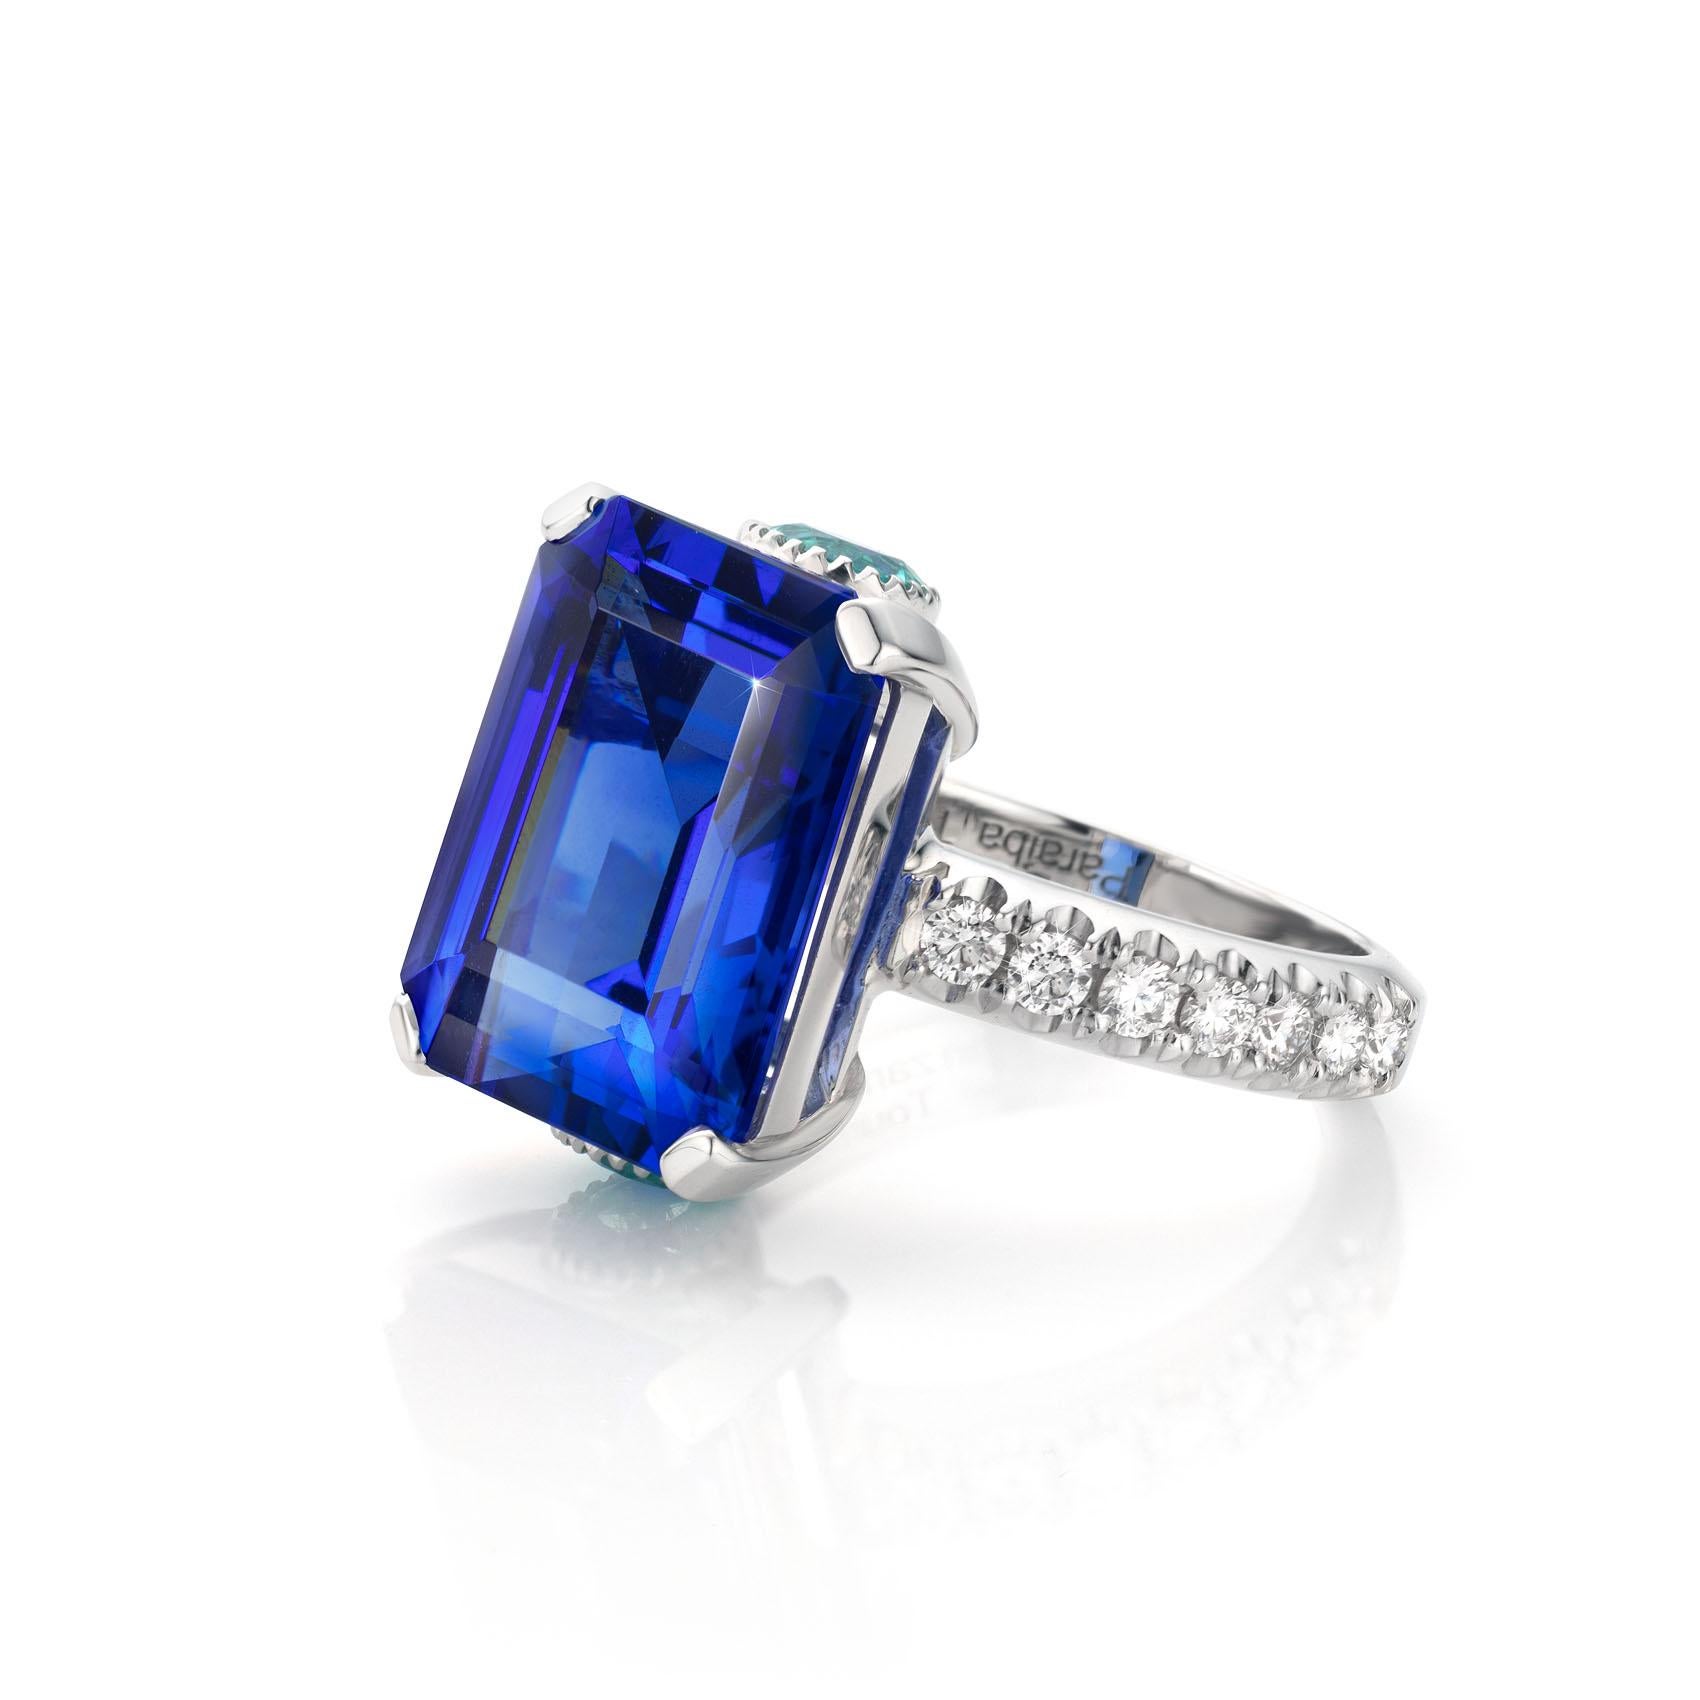 18 Karat White gold Cocktail Ring featuring a 12.4 Carat Tanzanite stone.

Emerald cut measuring 15.4 x 12.1 mm.
The Tanzanite Ring is set with 0.76 Carat Paraíba Tourmaline stones and Collection Grade Diamonds weighing 0.57 ct.

The vivid violetish